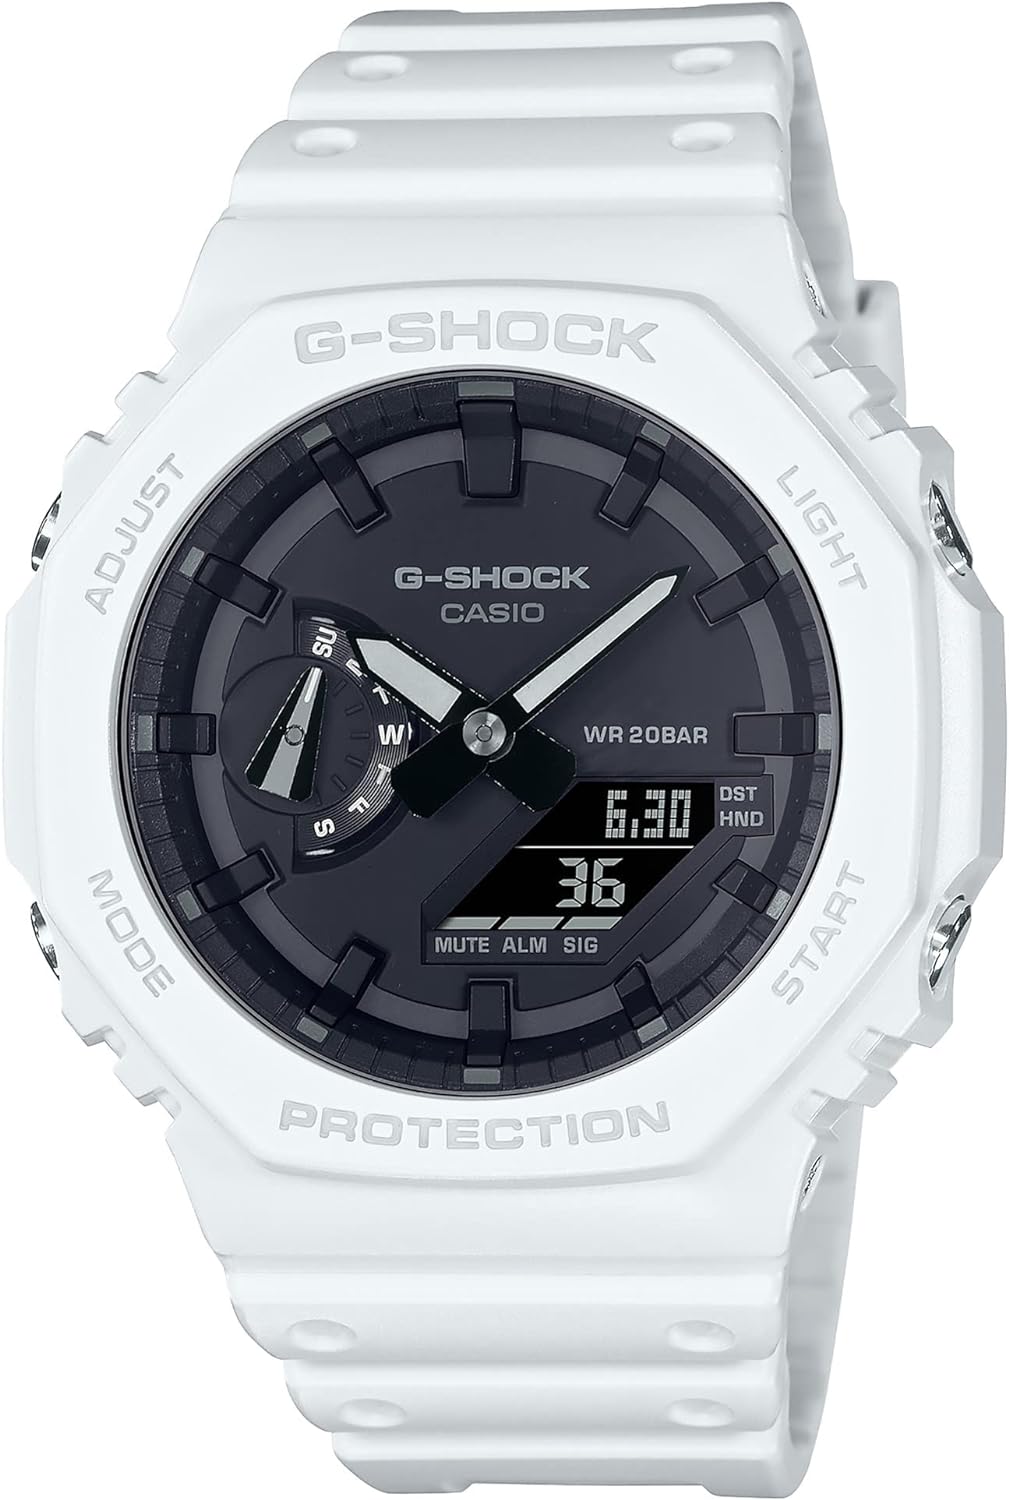 Review of G-Shock GA2100-7A